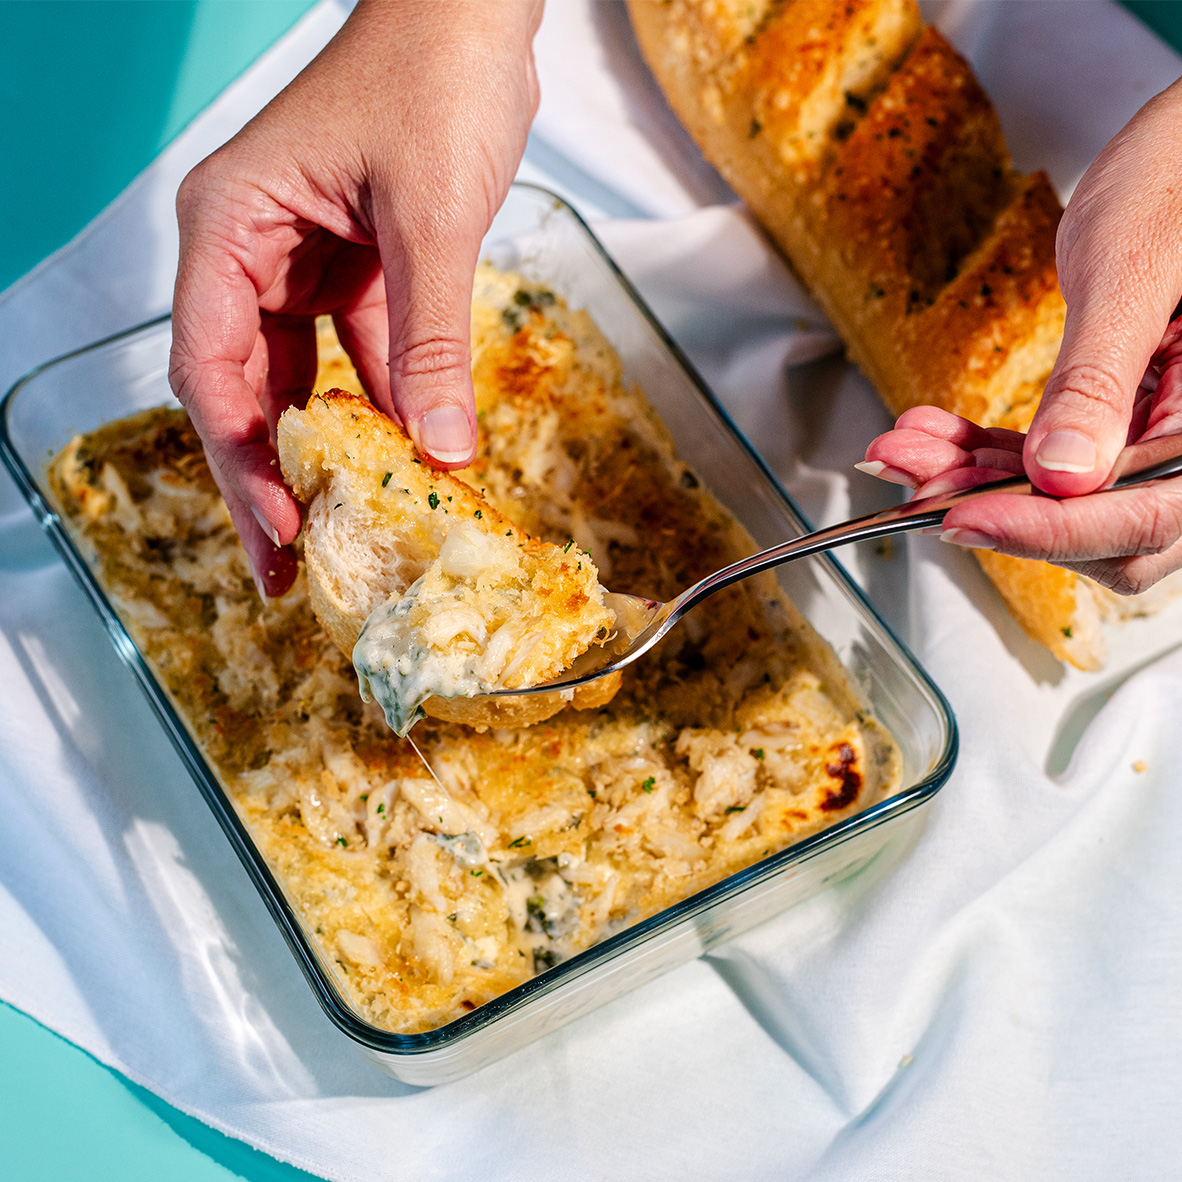 Our famous Lump Crab & Spinach Dip 🦀 and delicious Jumbo Lump Crab Cakes 🦀 are on SALE on @Goldbelly for a limited time only! Click the link below to order now and we’ll ship straight to your door! bit.ly/3W1iHHo #Goldbelly #Pappadeaux #Deauxlivery